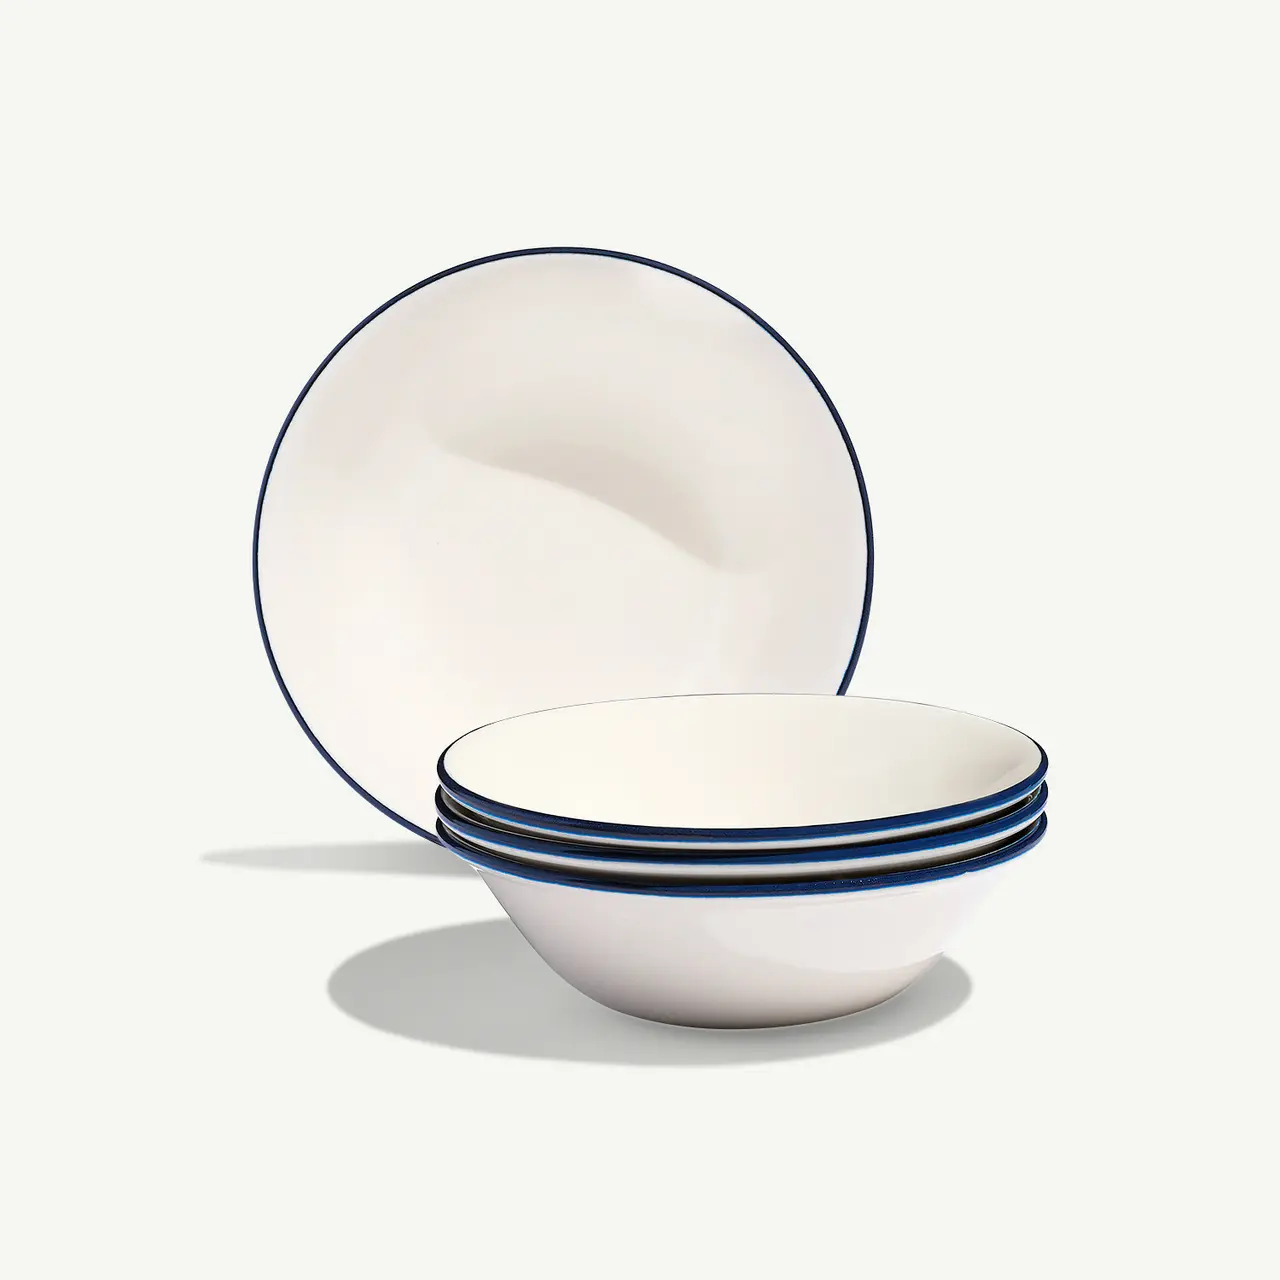 A stack of white bowls with blue trim lines near the edges sits in front of a standing matching plate with a plain backdrop.